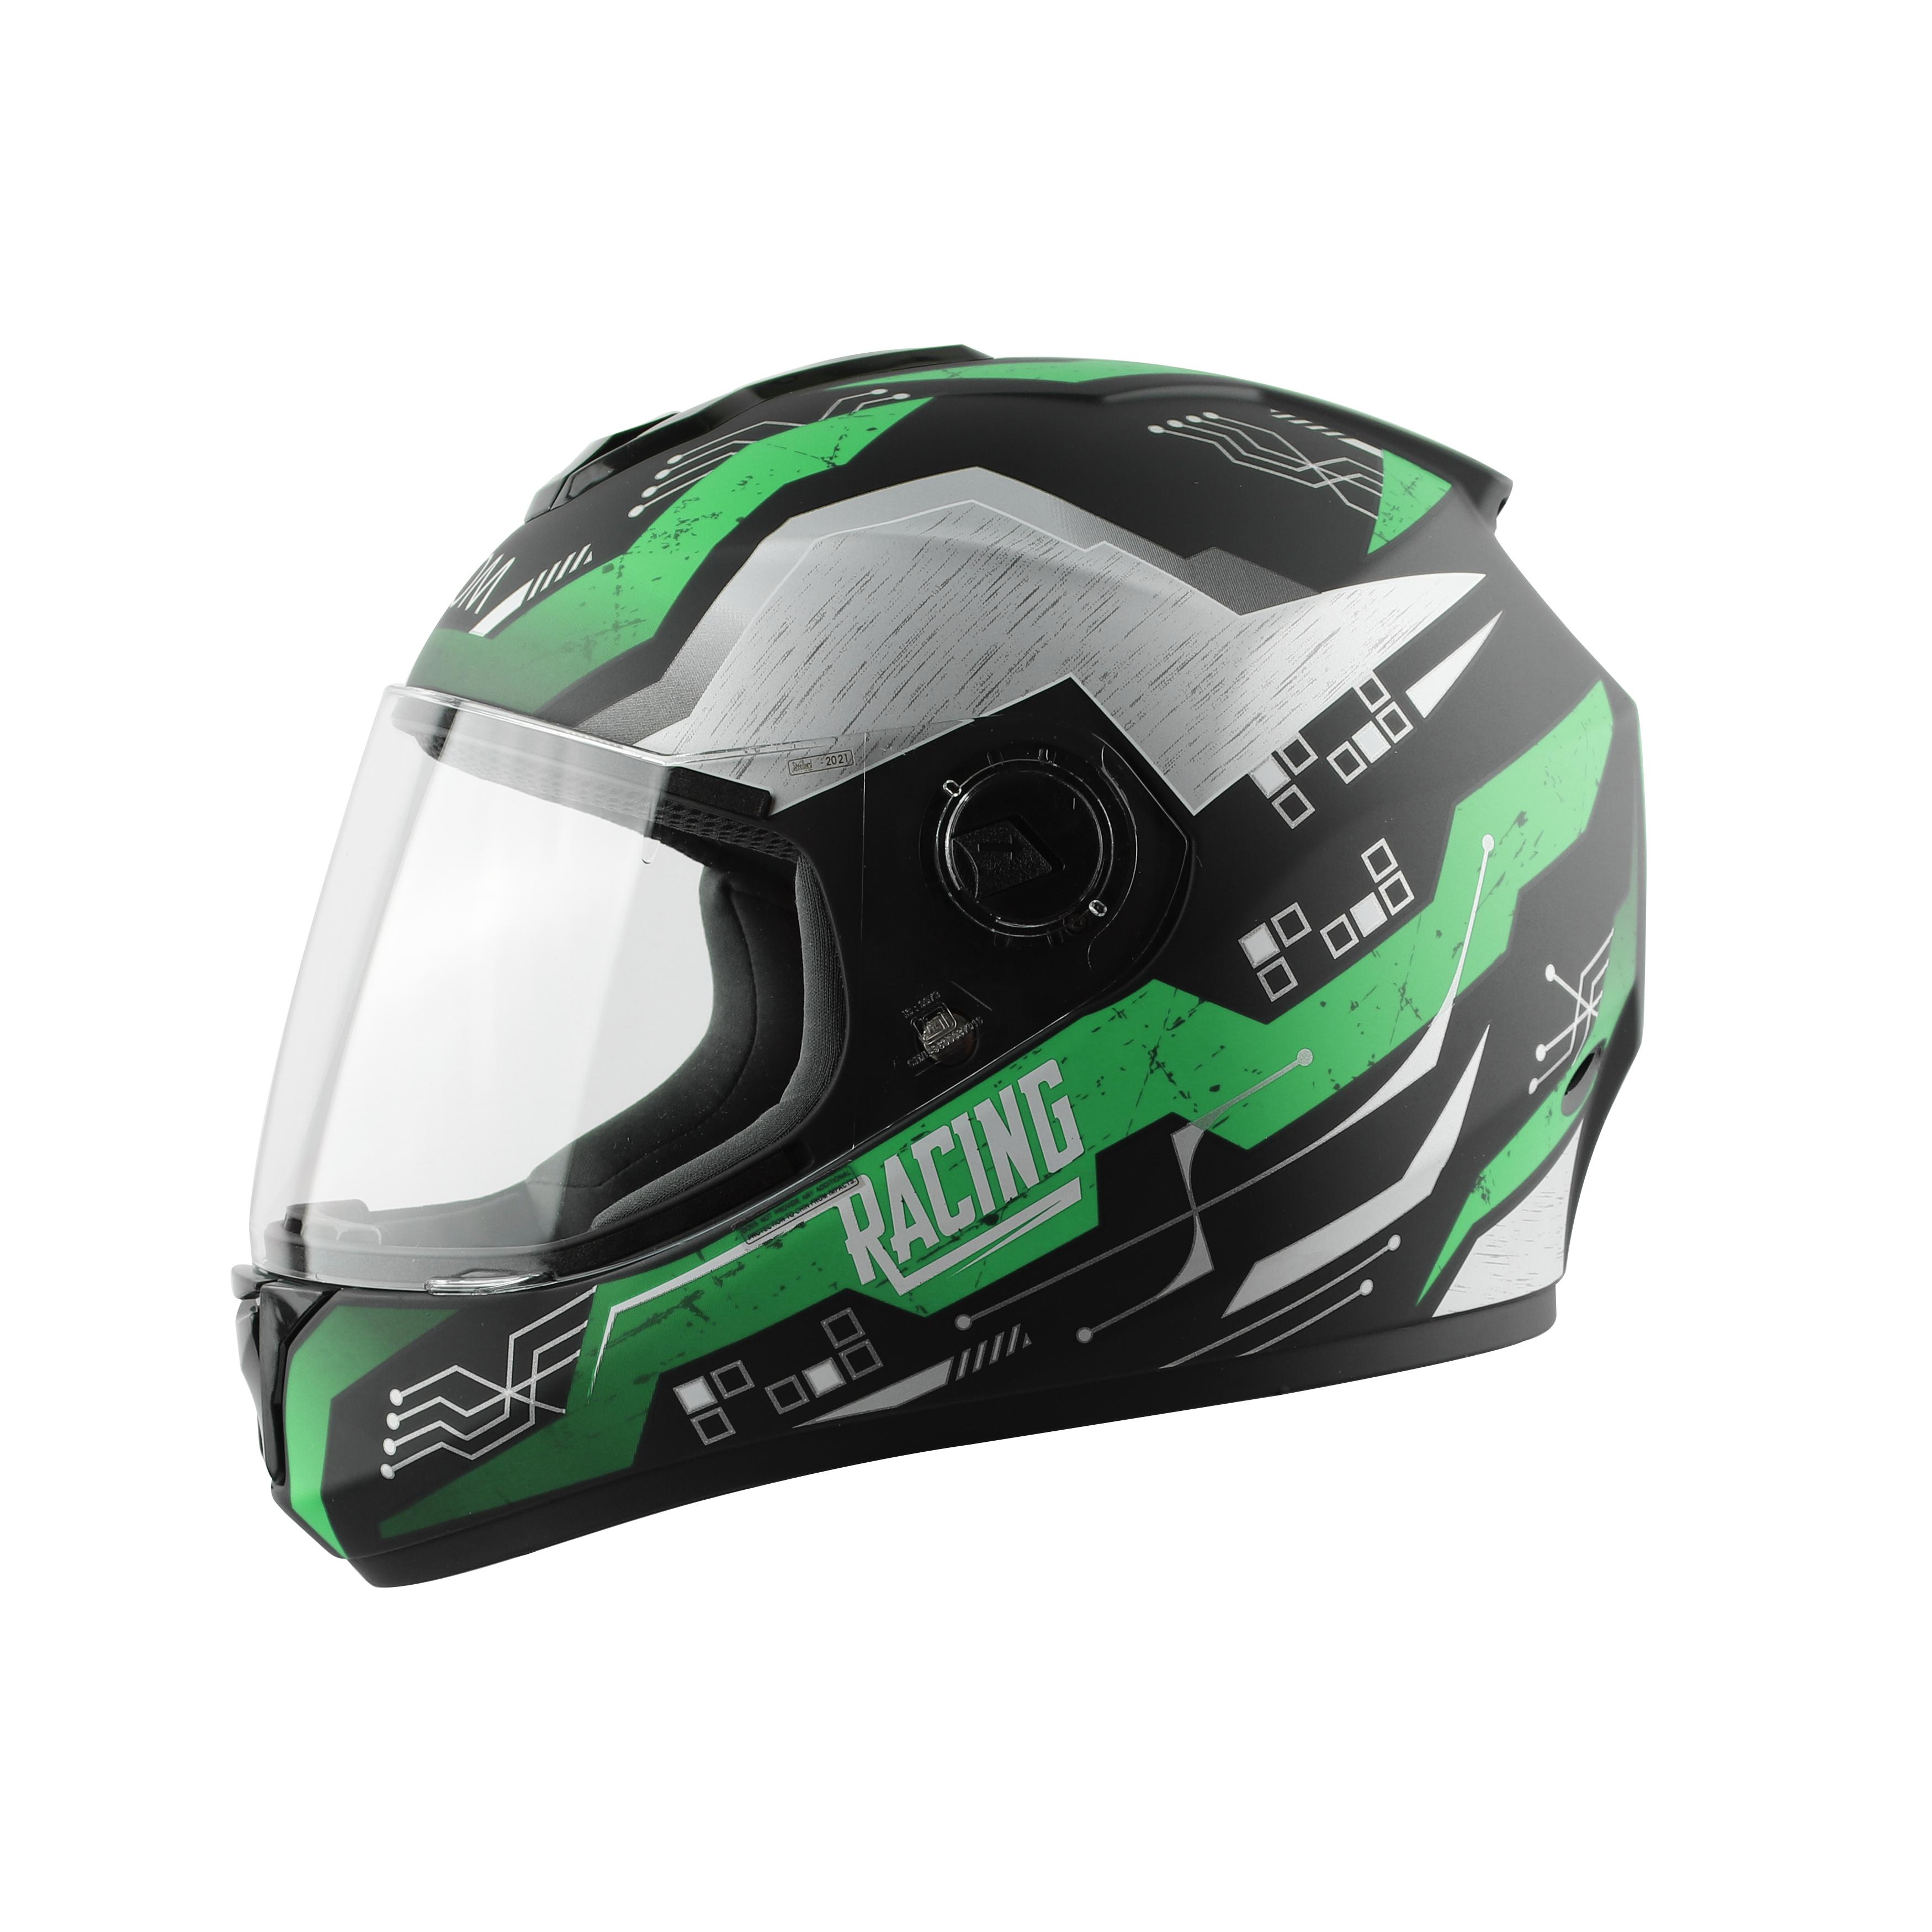 SBH-11 ZOOM RACING GLOSSY BLACK WITH FLUO GREEN